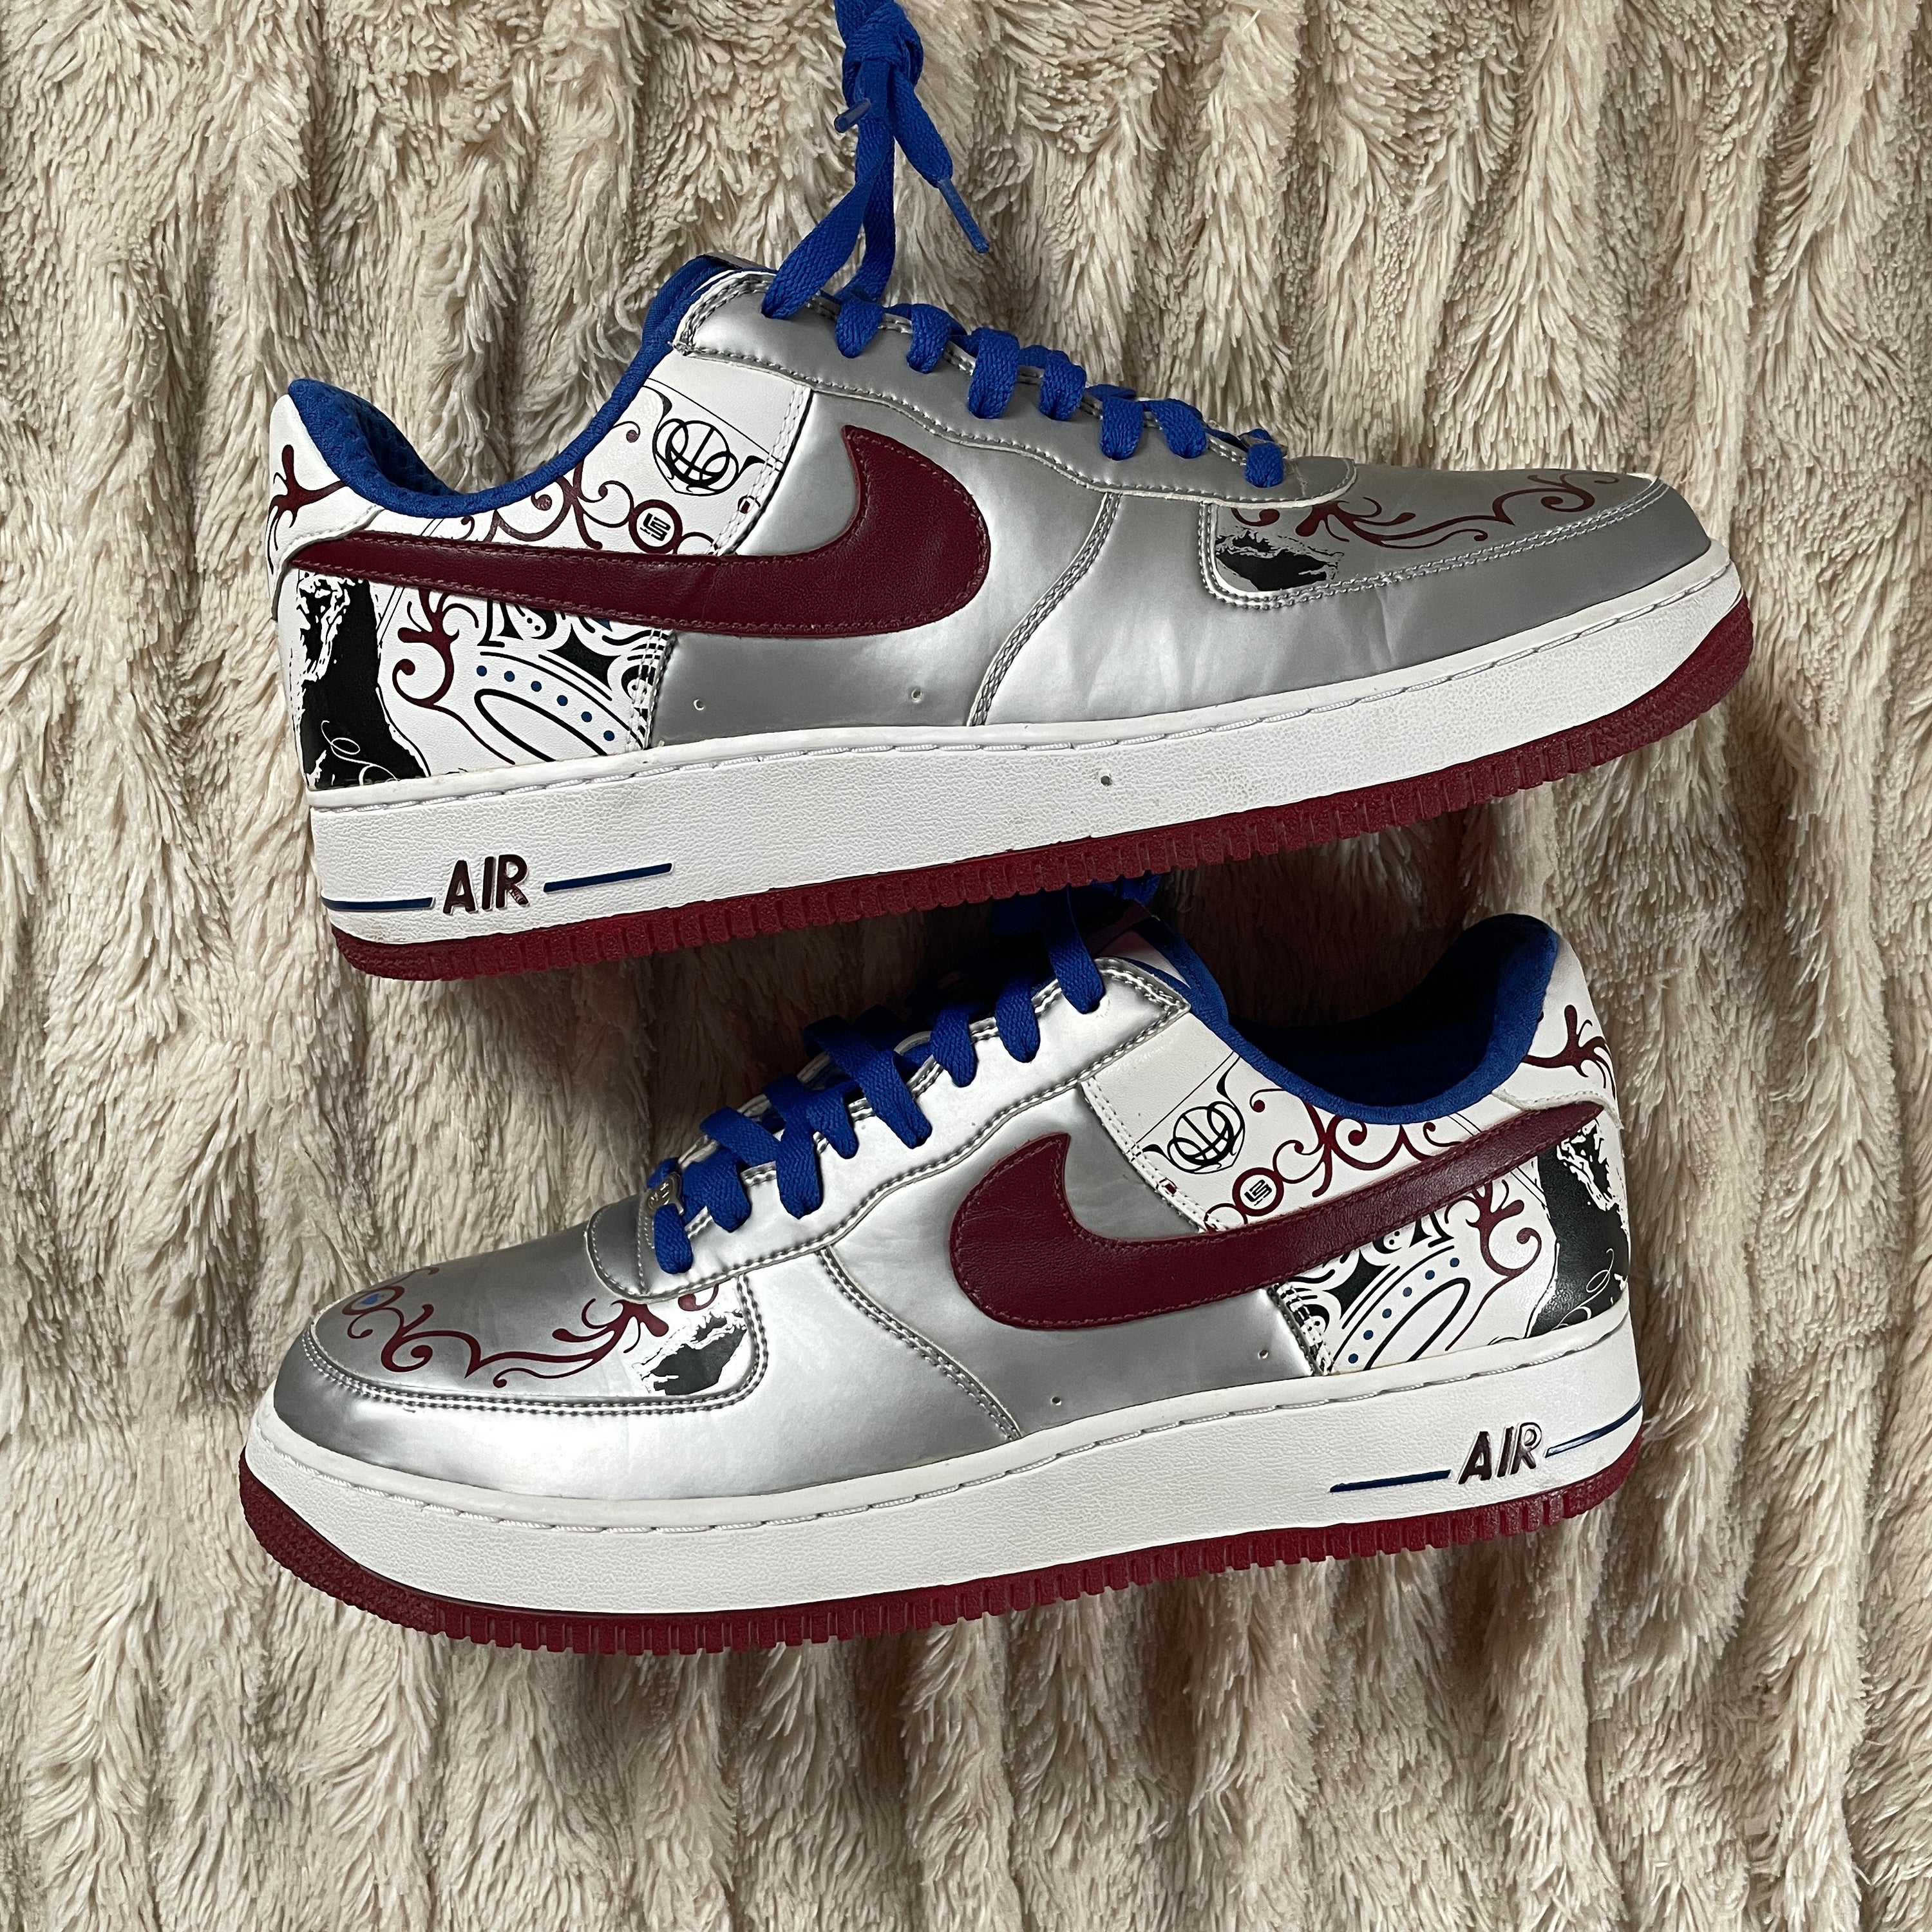 US 12  - NIKE AIR FORCE 1 LOW PREMIUM "COLLECTION ROYALE LEBRON" [2006]